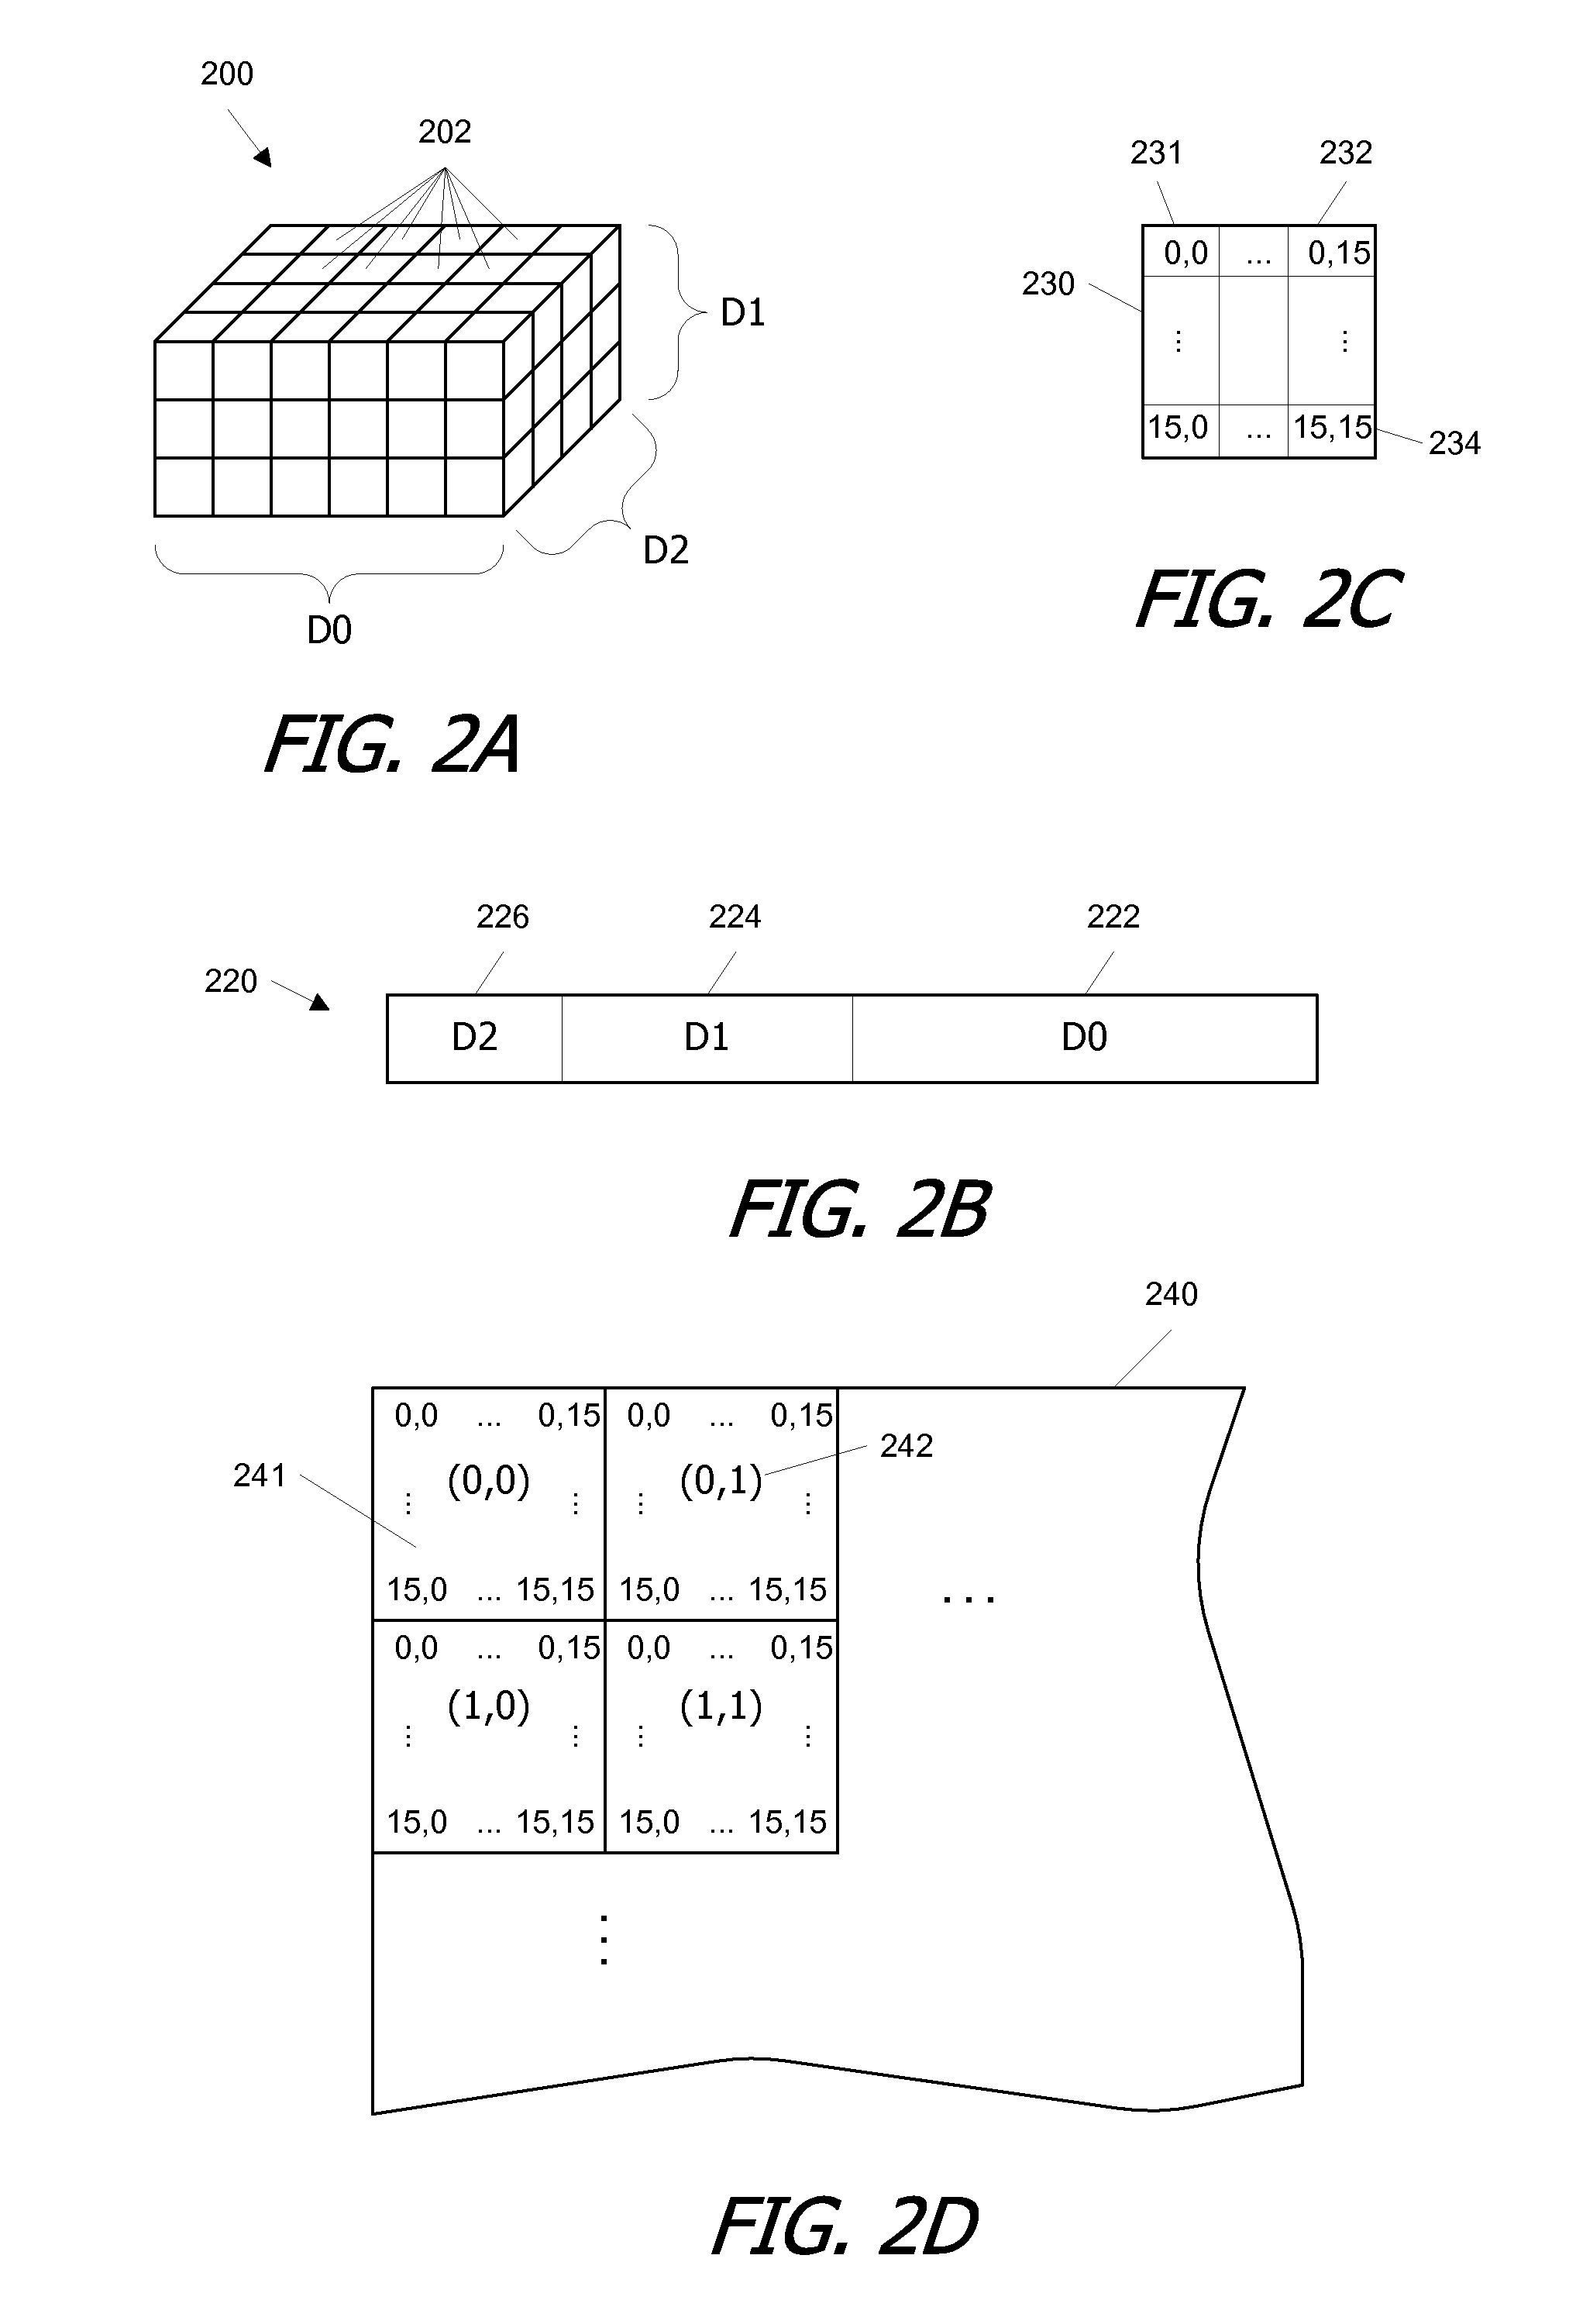 Parallel data processing systems and methods using cooperative thread arrays and thread identifier values to determine processing behavior